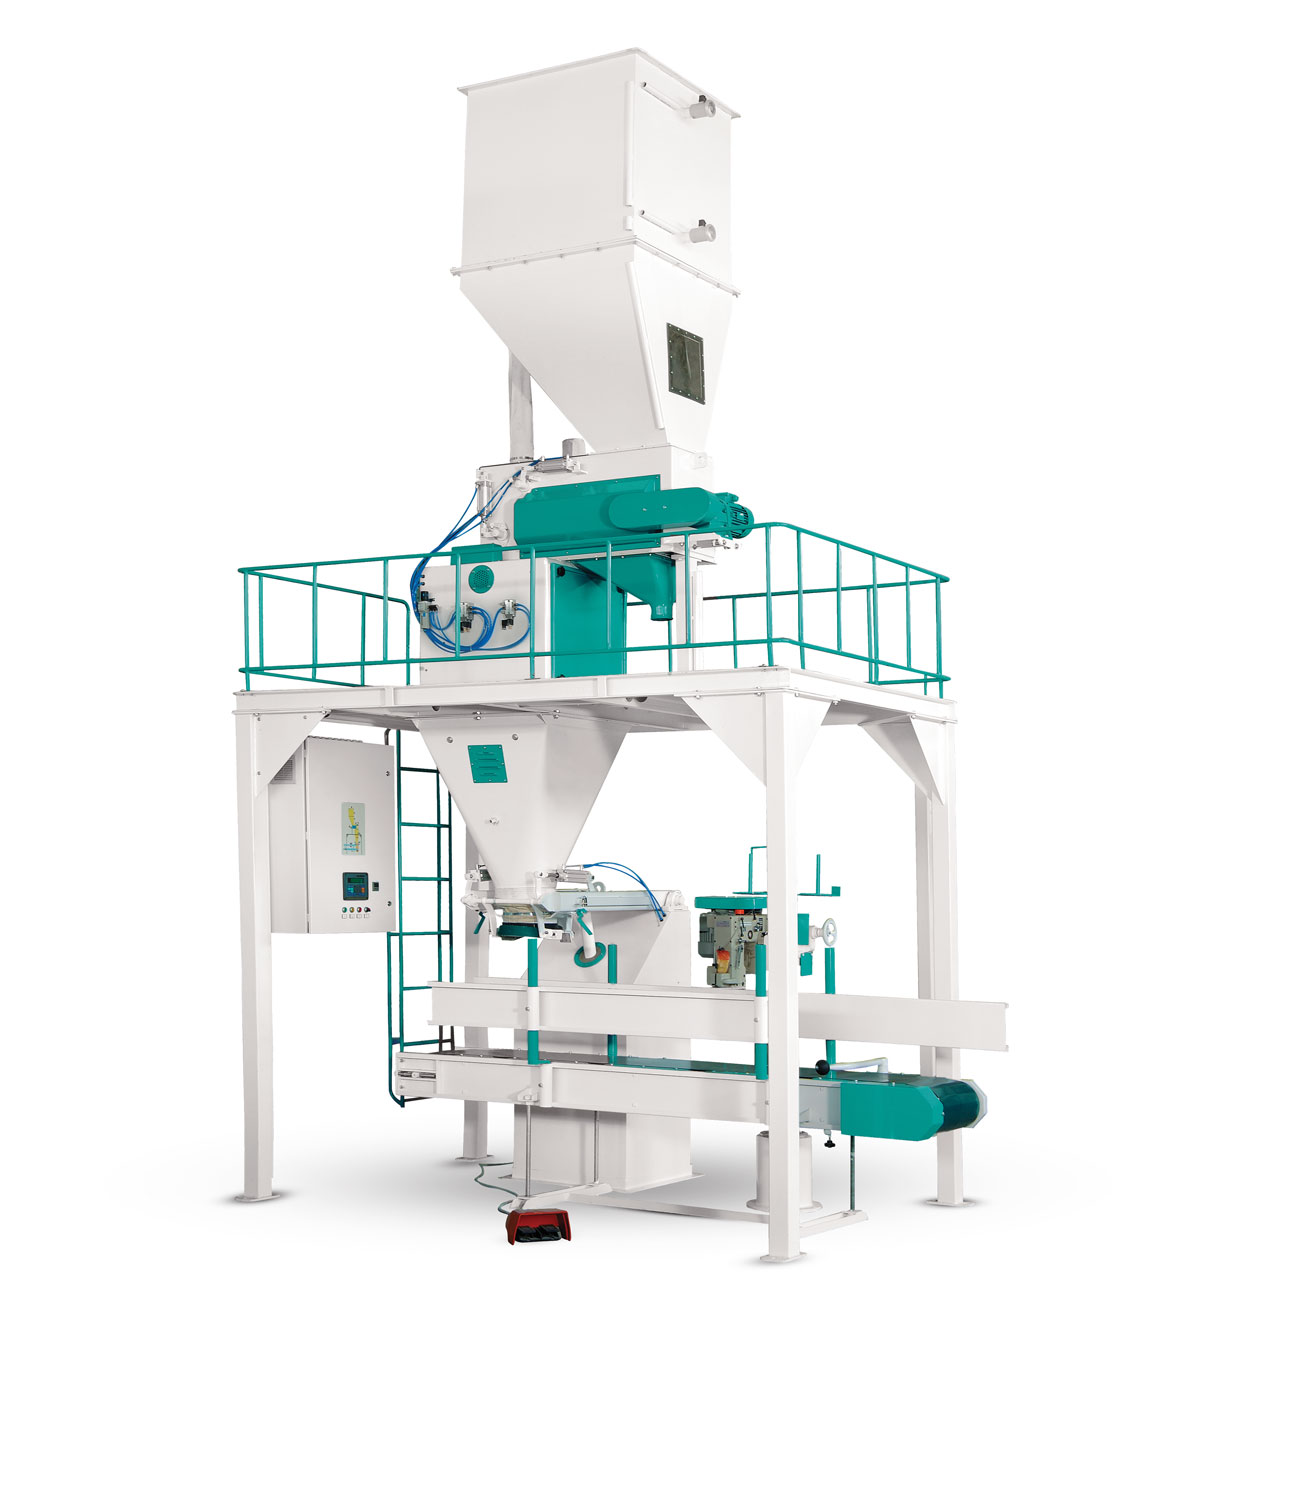 Flour Bagging Machine System With Double Weigh Hopper & Single Station 5/10 Kg5